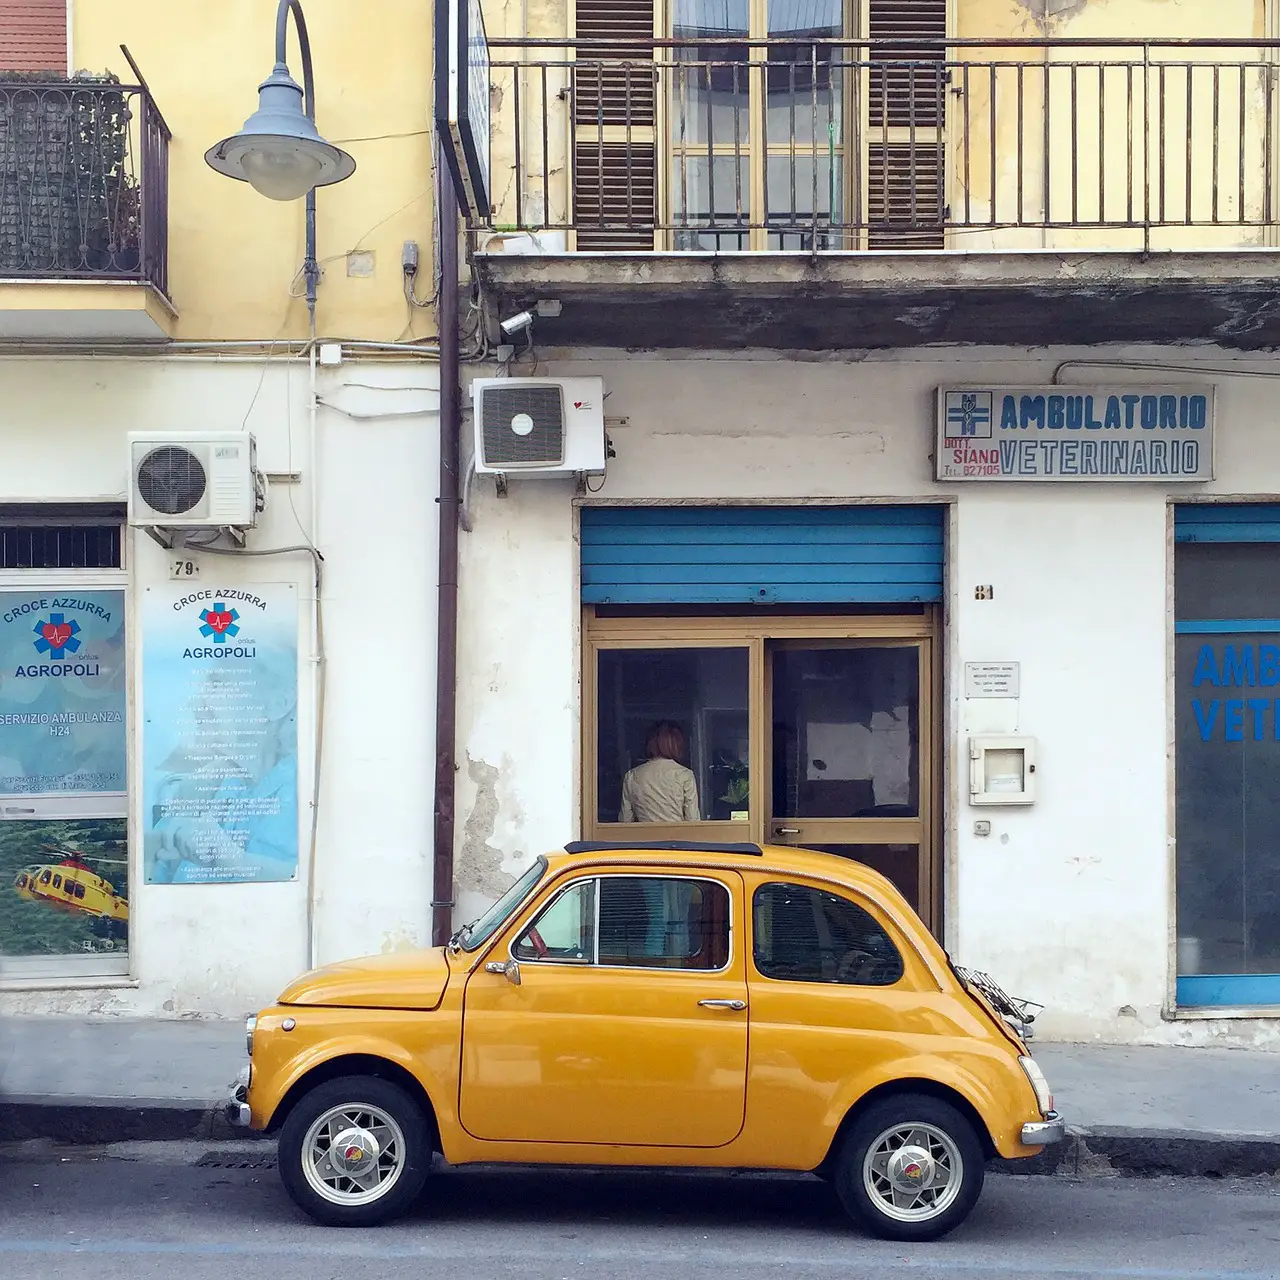 Fiat 500, the really small car